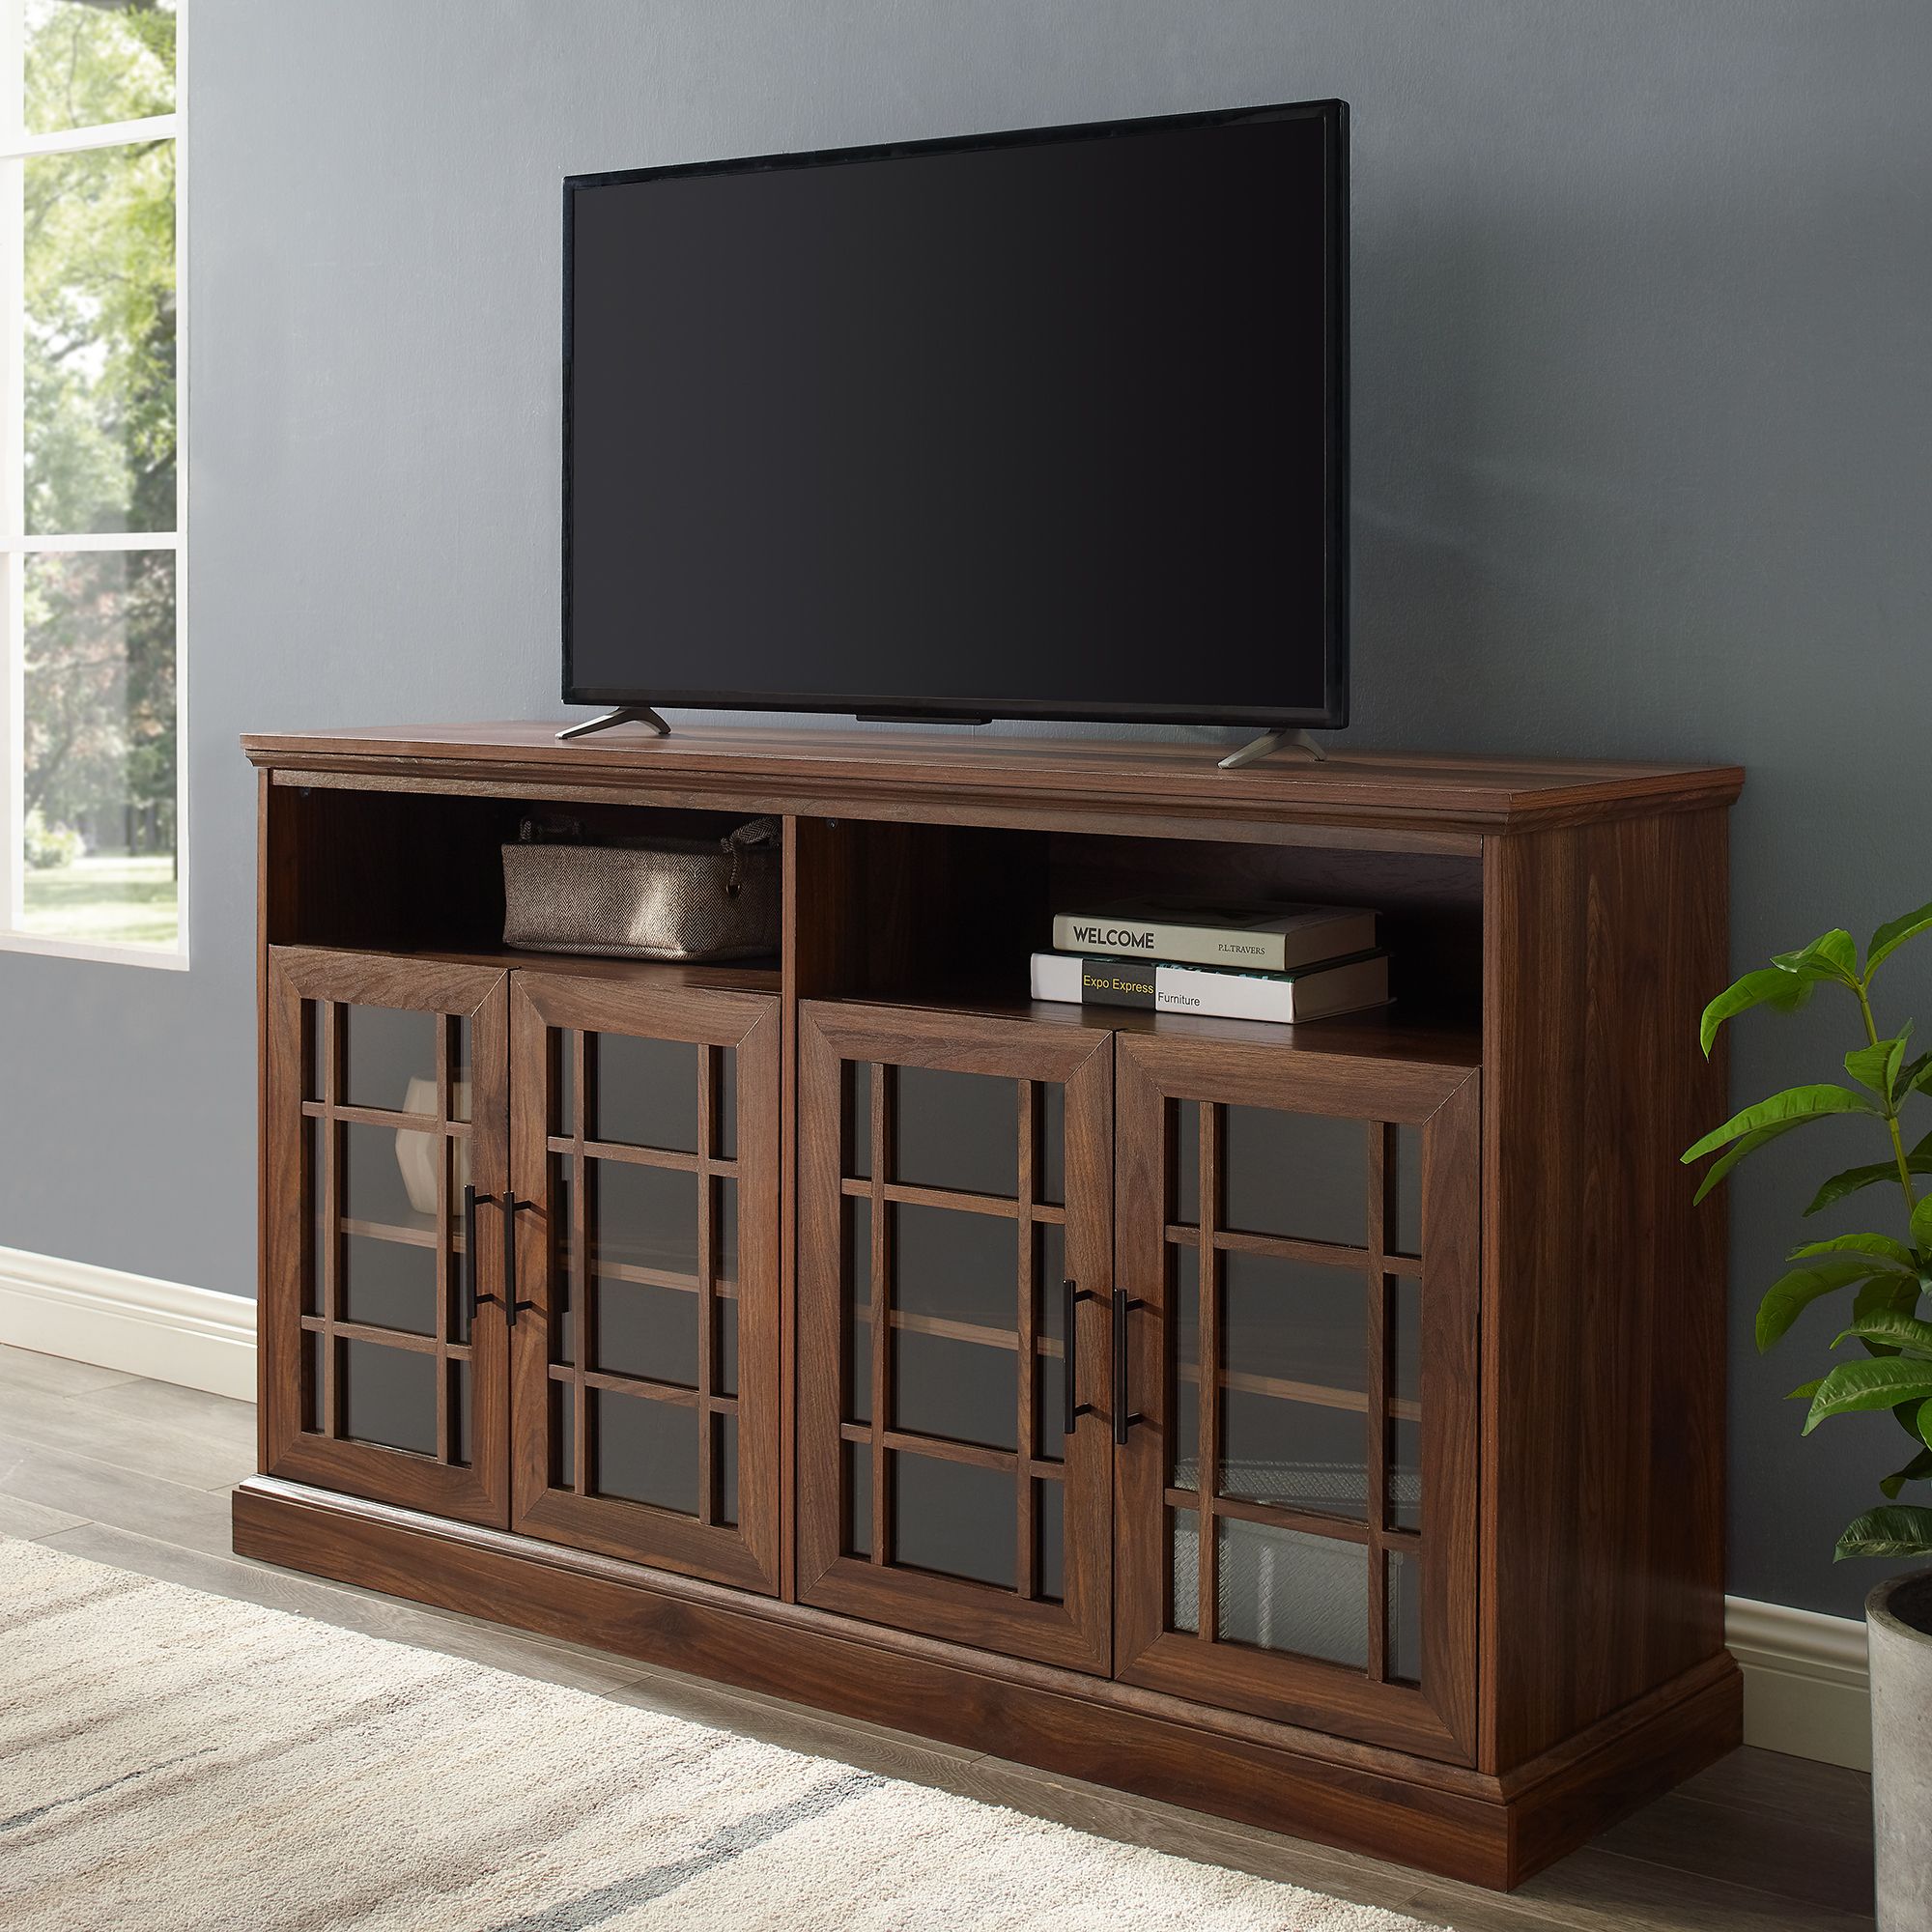 Manor Park Classic Glass Door Tv Stand For Tvs Up To 65 In Classic Tv Stands (View 4 of 15)